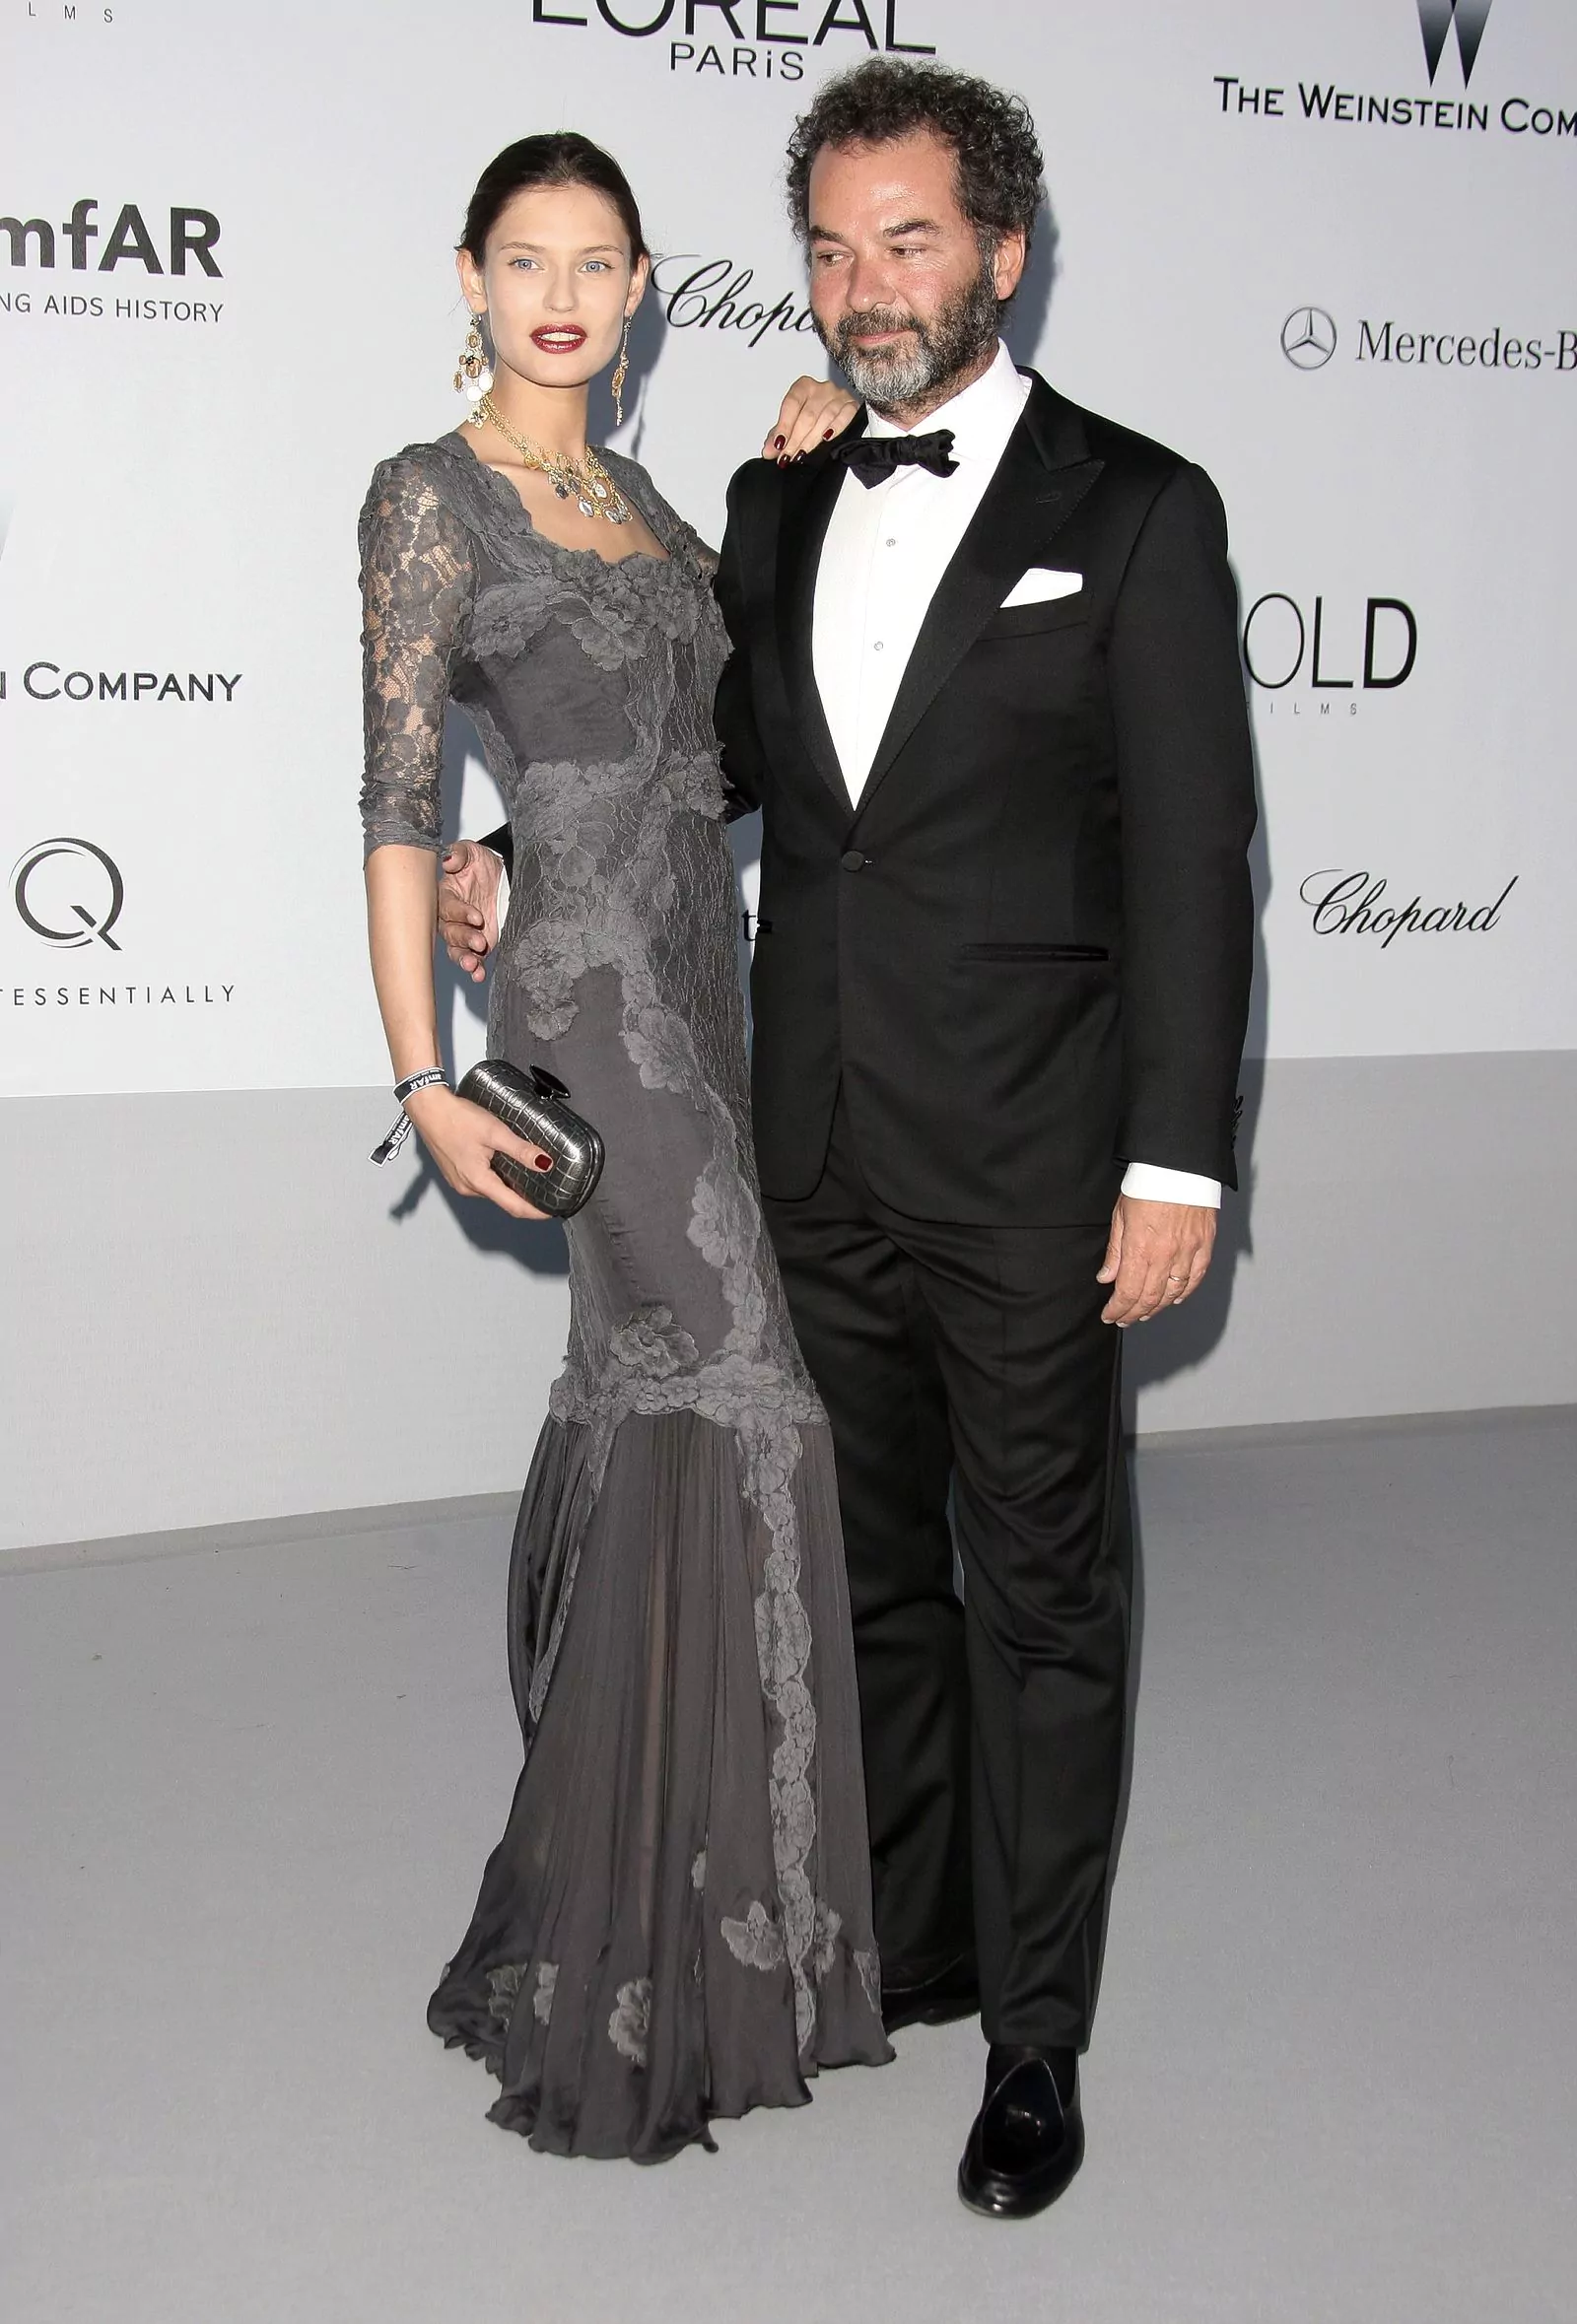 Bianca Balti and Remo Ruffini at the amfAR charity gala in Cannes, May 24, 2012.